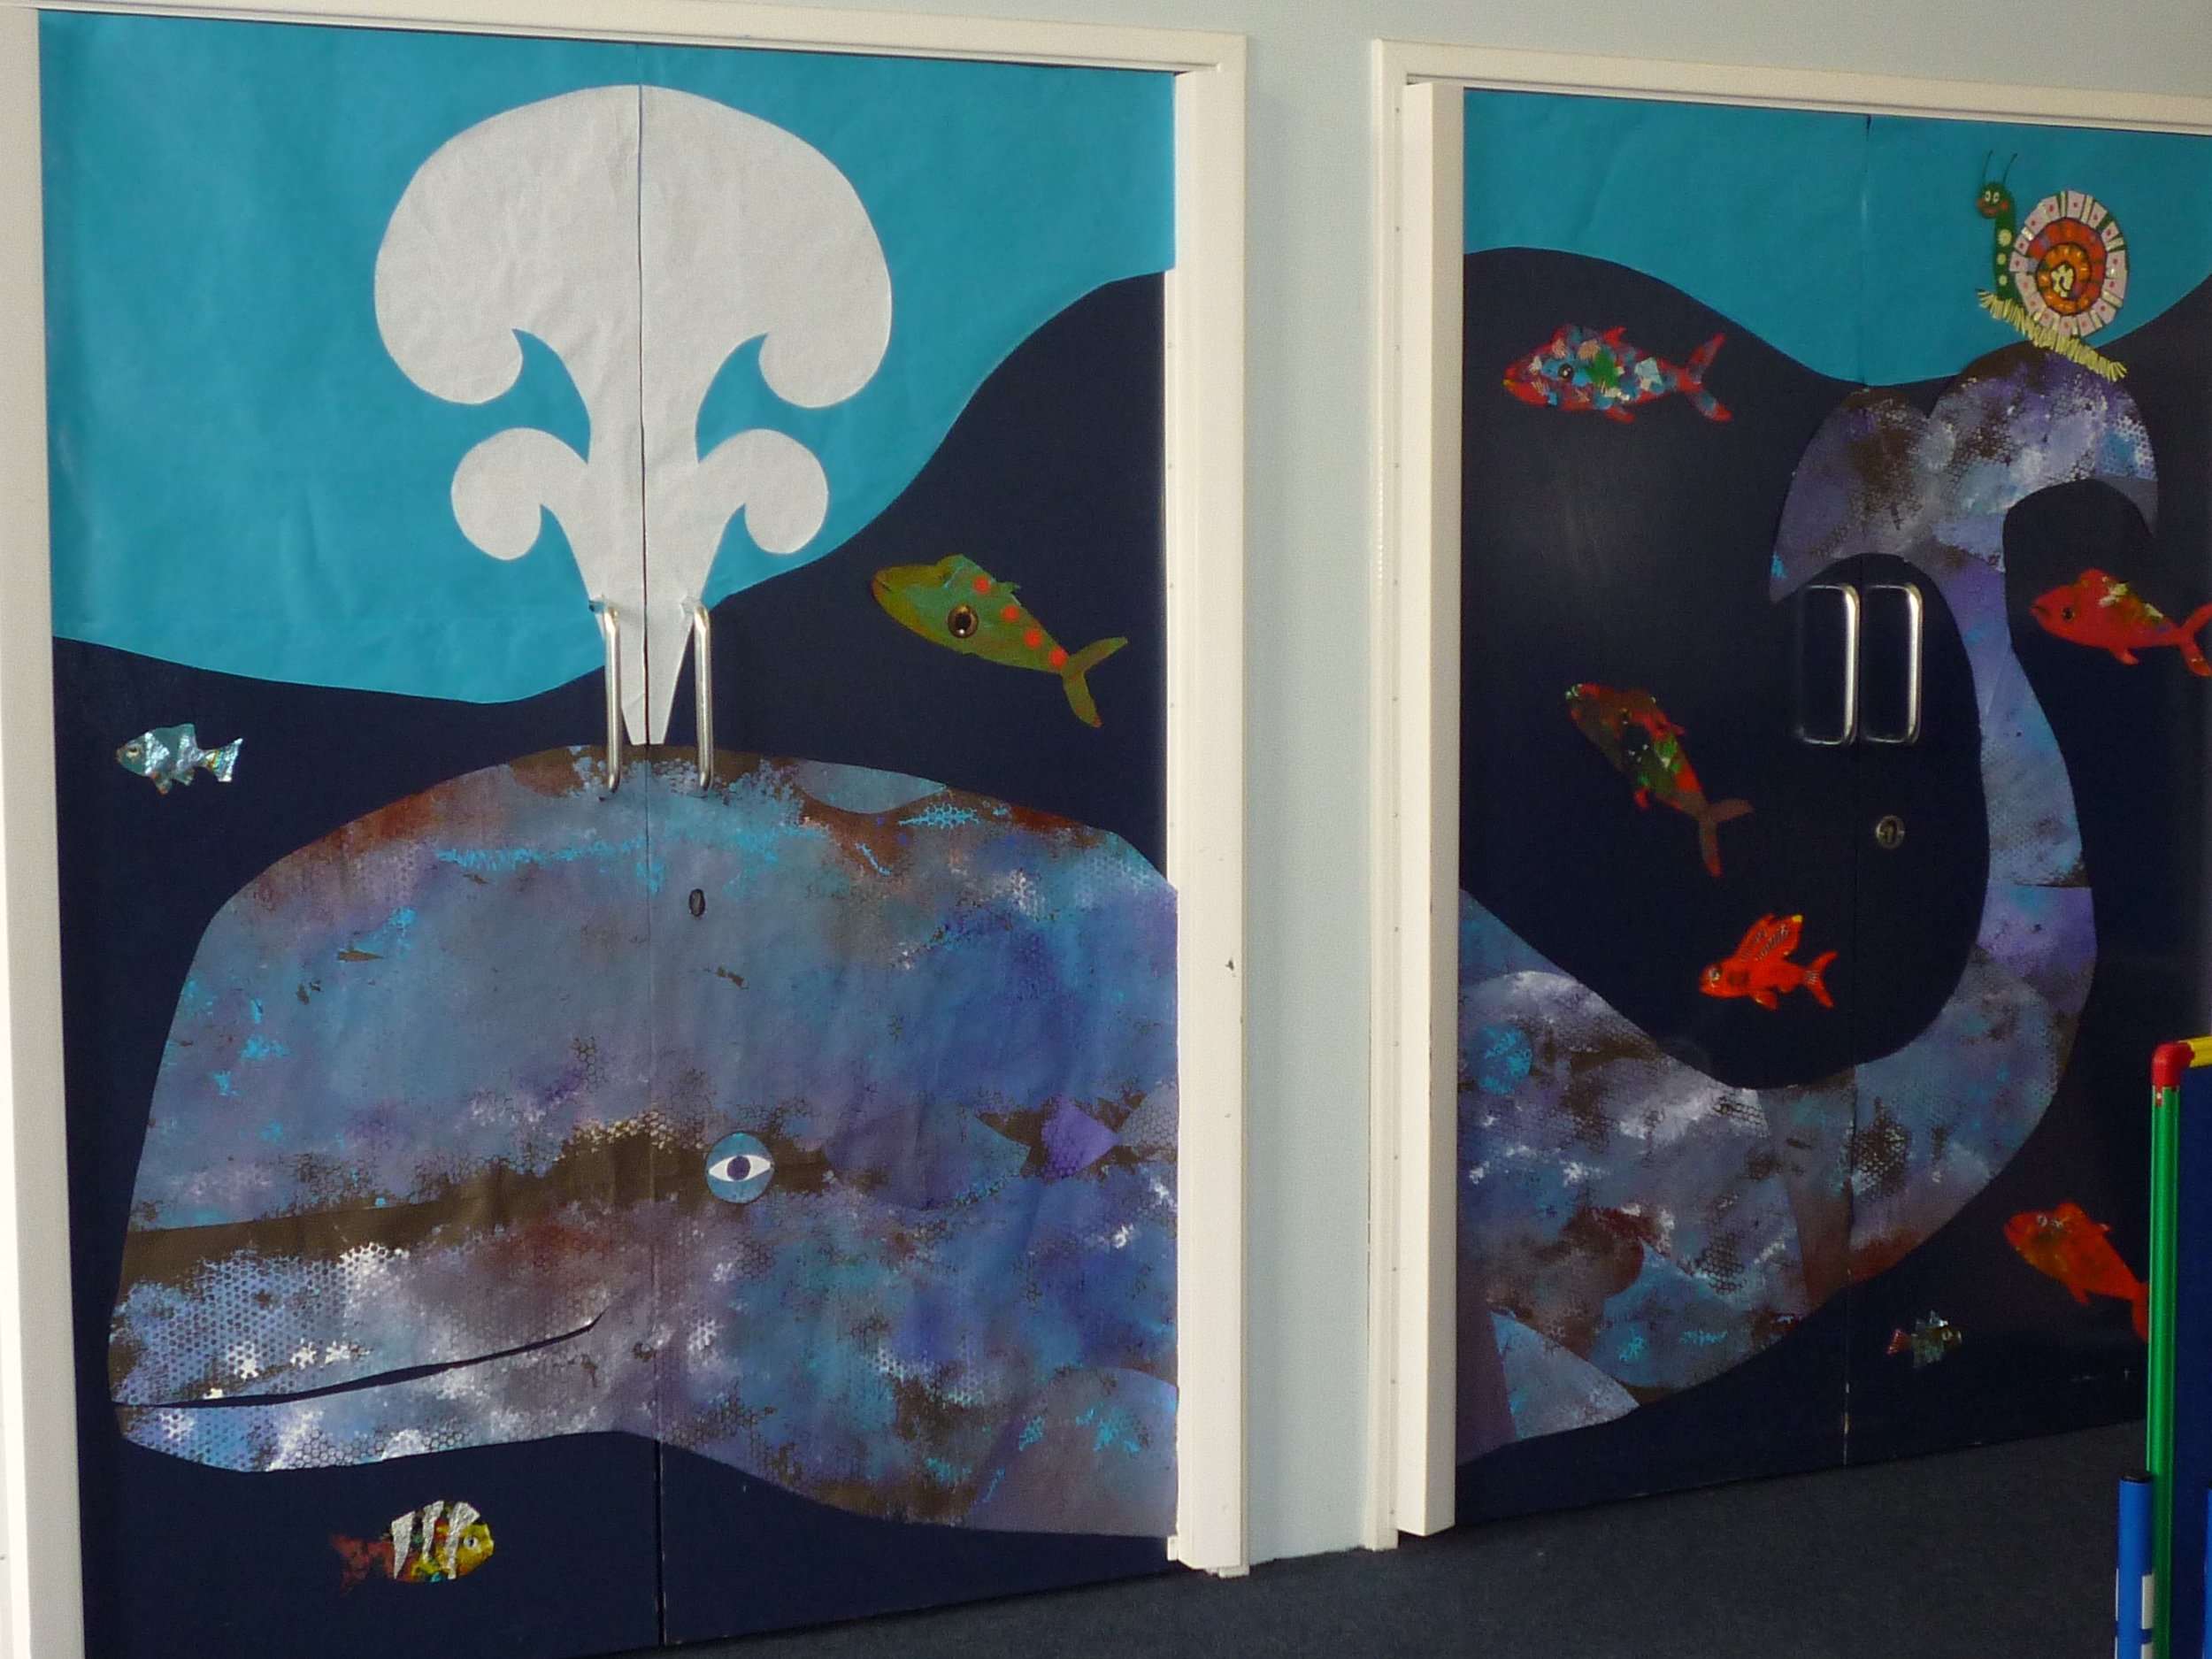 Mural, 'Whale and the snail'